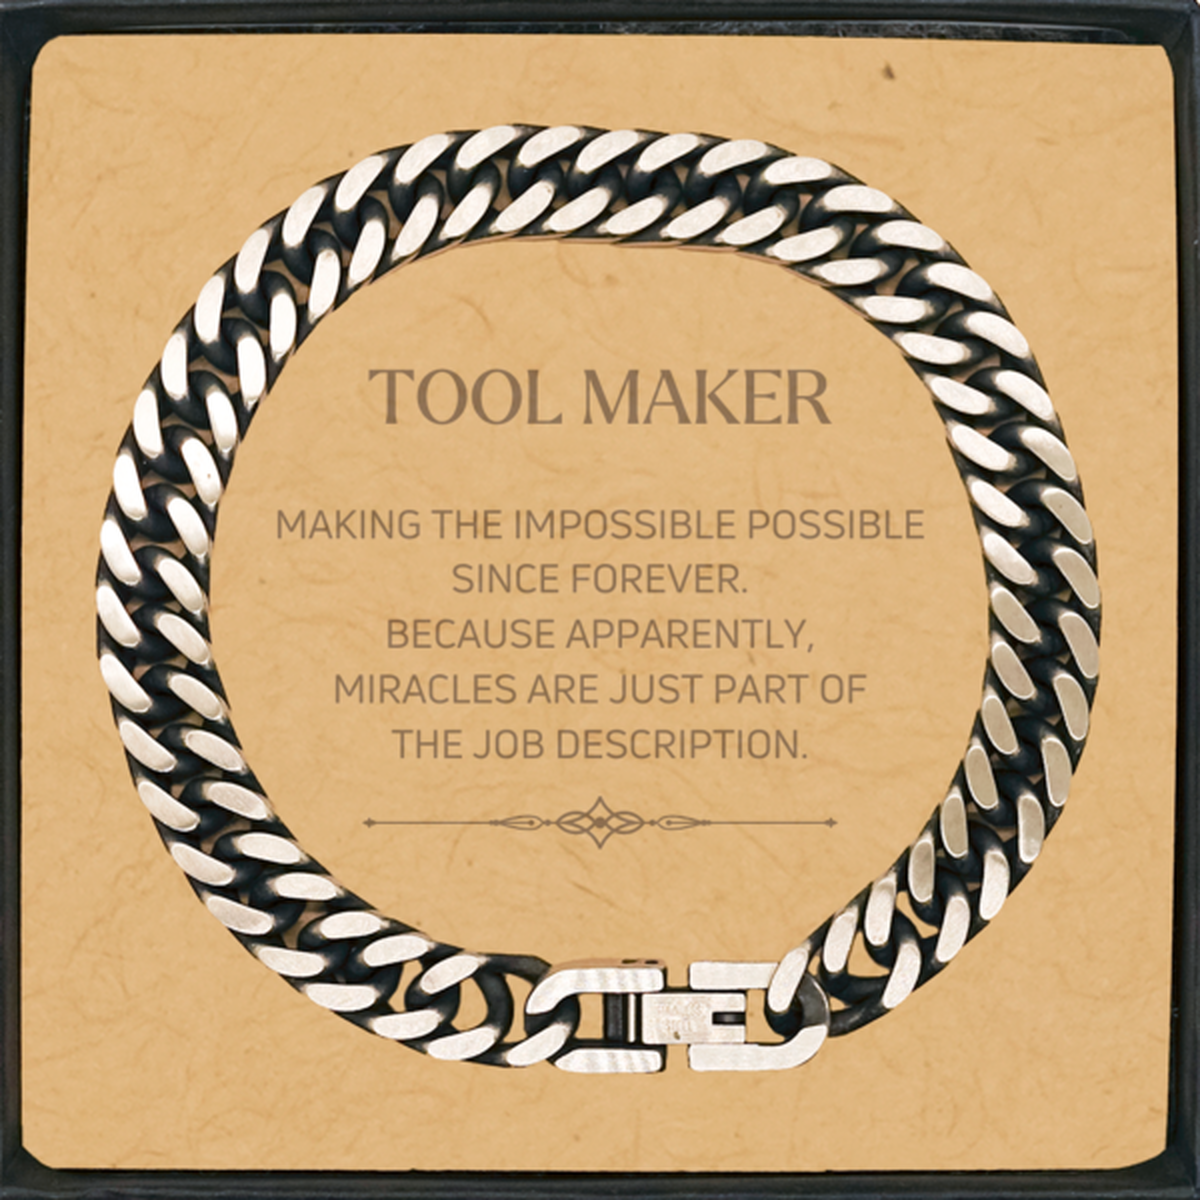 Funny Tool Maker Gifts, Miracles are just part of the job description, Inspirational Birthday Cuban Link Chain Bracelet For Tool Maker, Men, Women, Coworkers, Friends, Boss